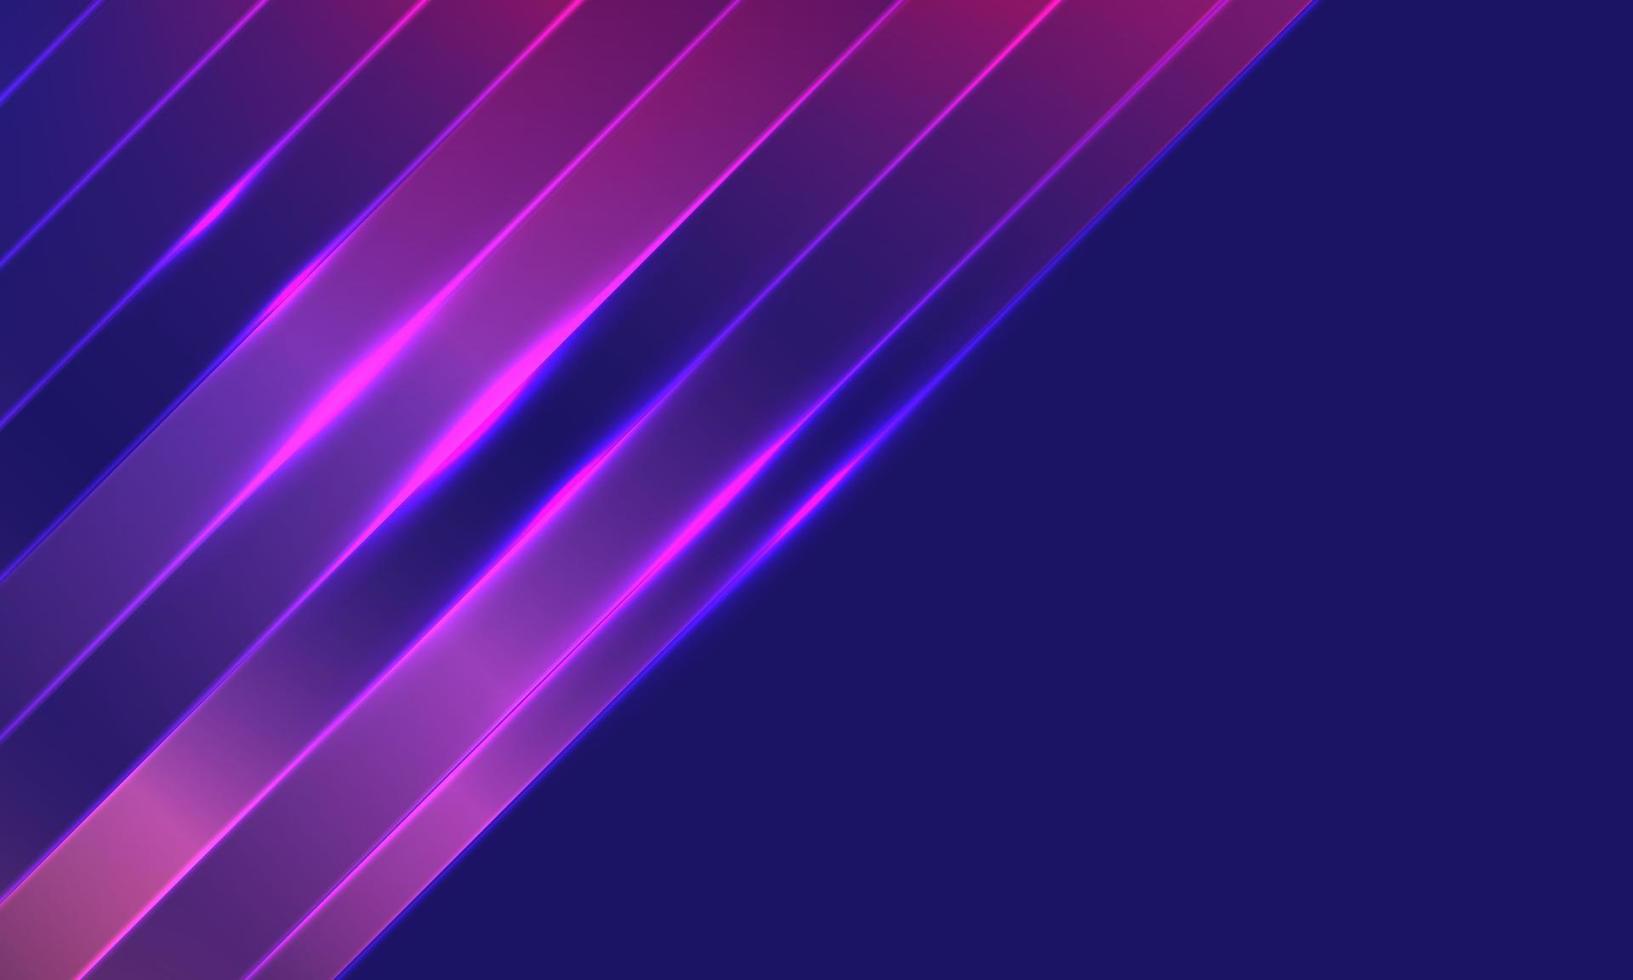 Abstract pink purple light line geometric with blank space design mpdern futuristic background vector